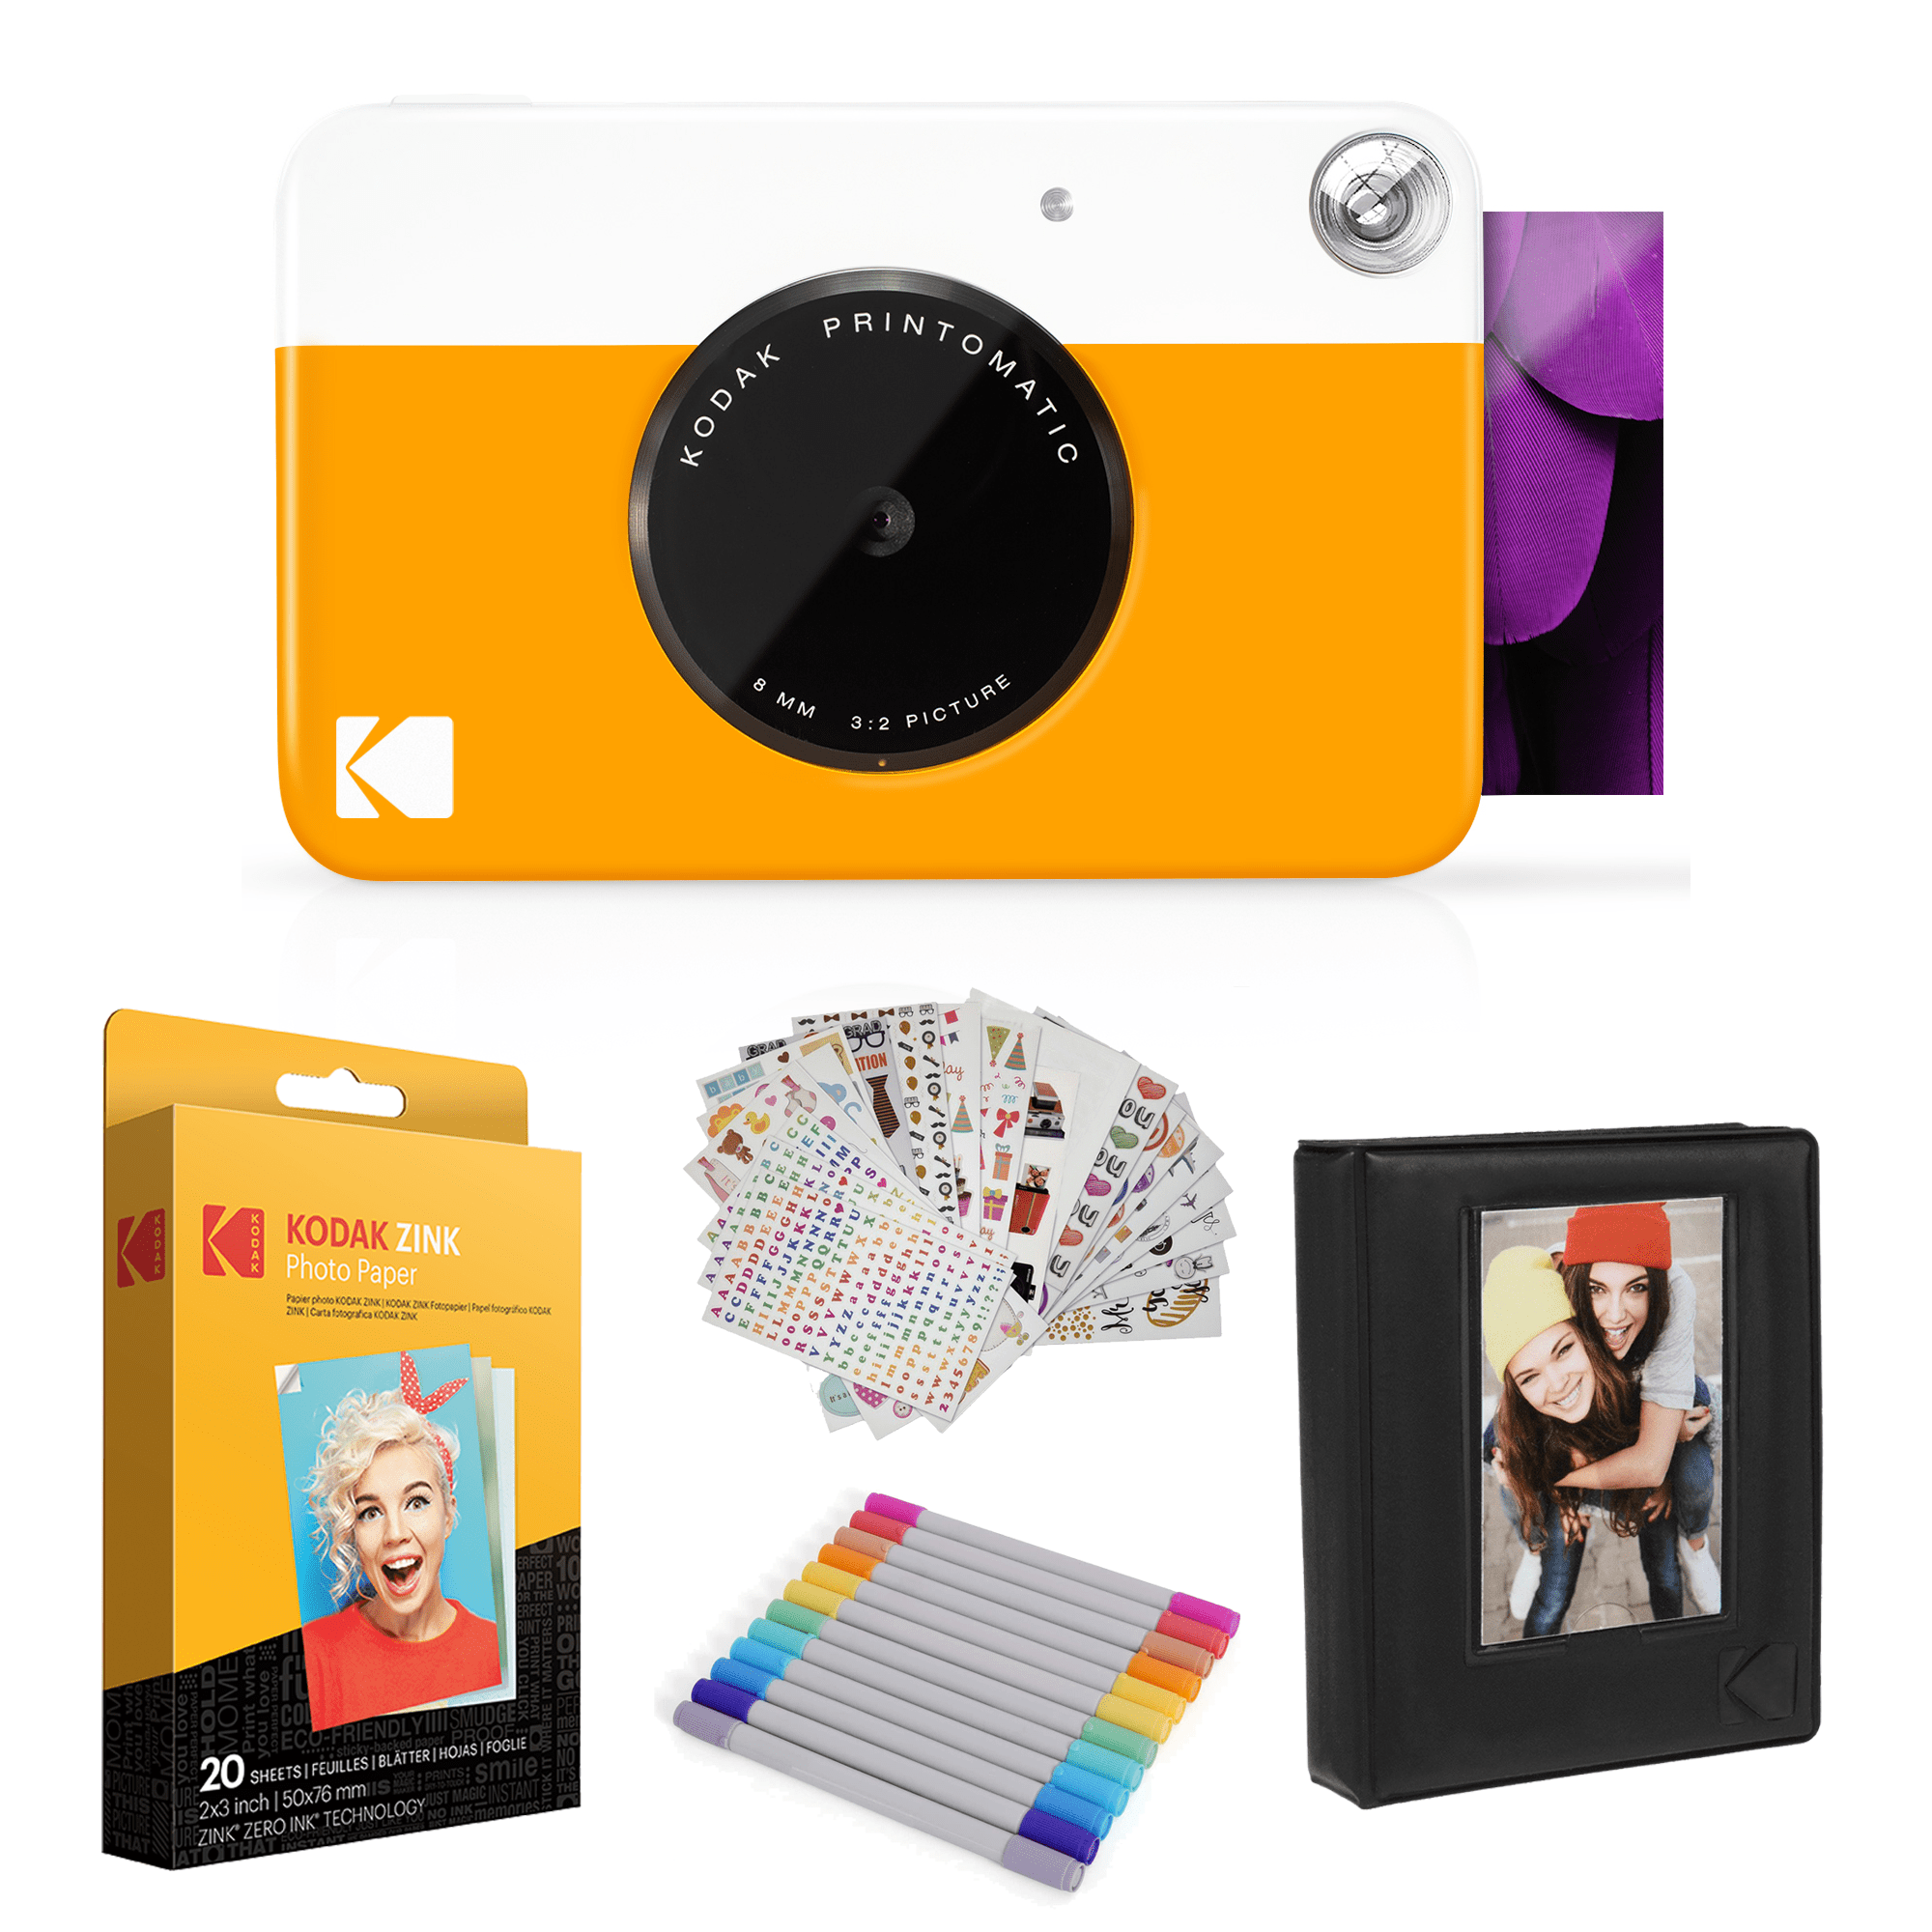 KODAK Printomatic Digital Instant Print Camera - Full Color Prints On ZINK  2x3 Sticky-Backed Photo Paper (Blue) Print Memories Instantly